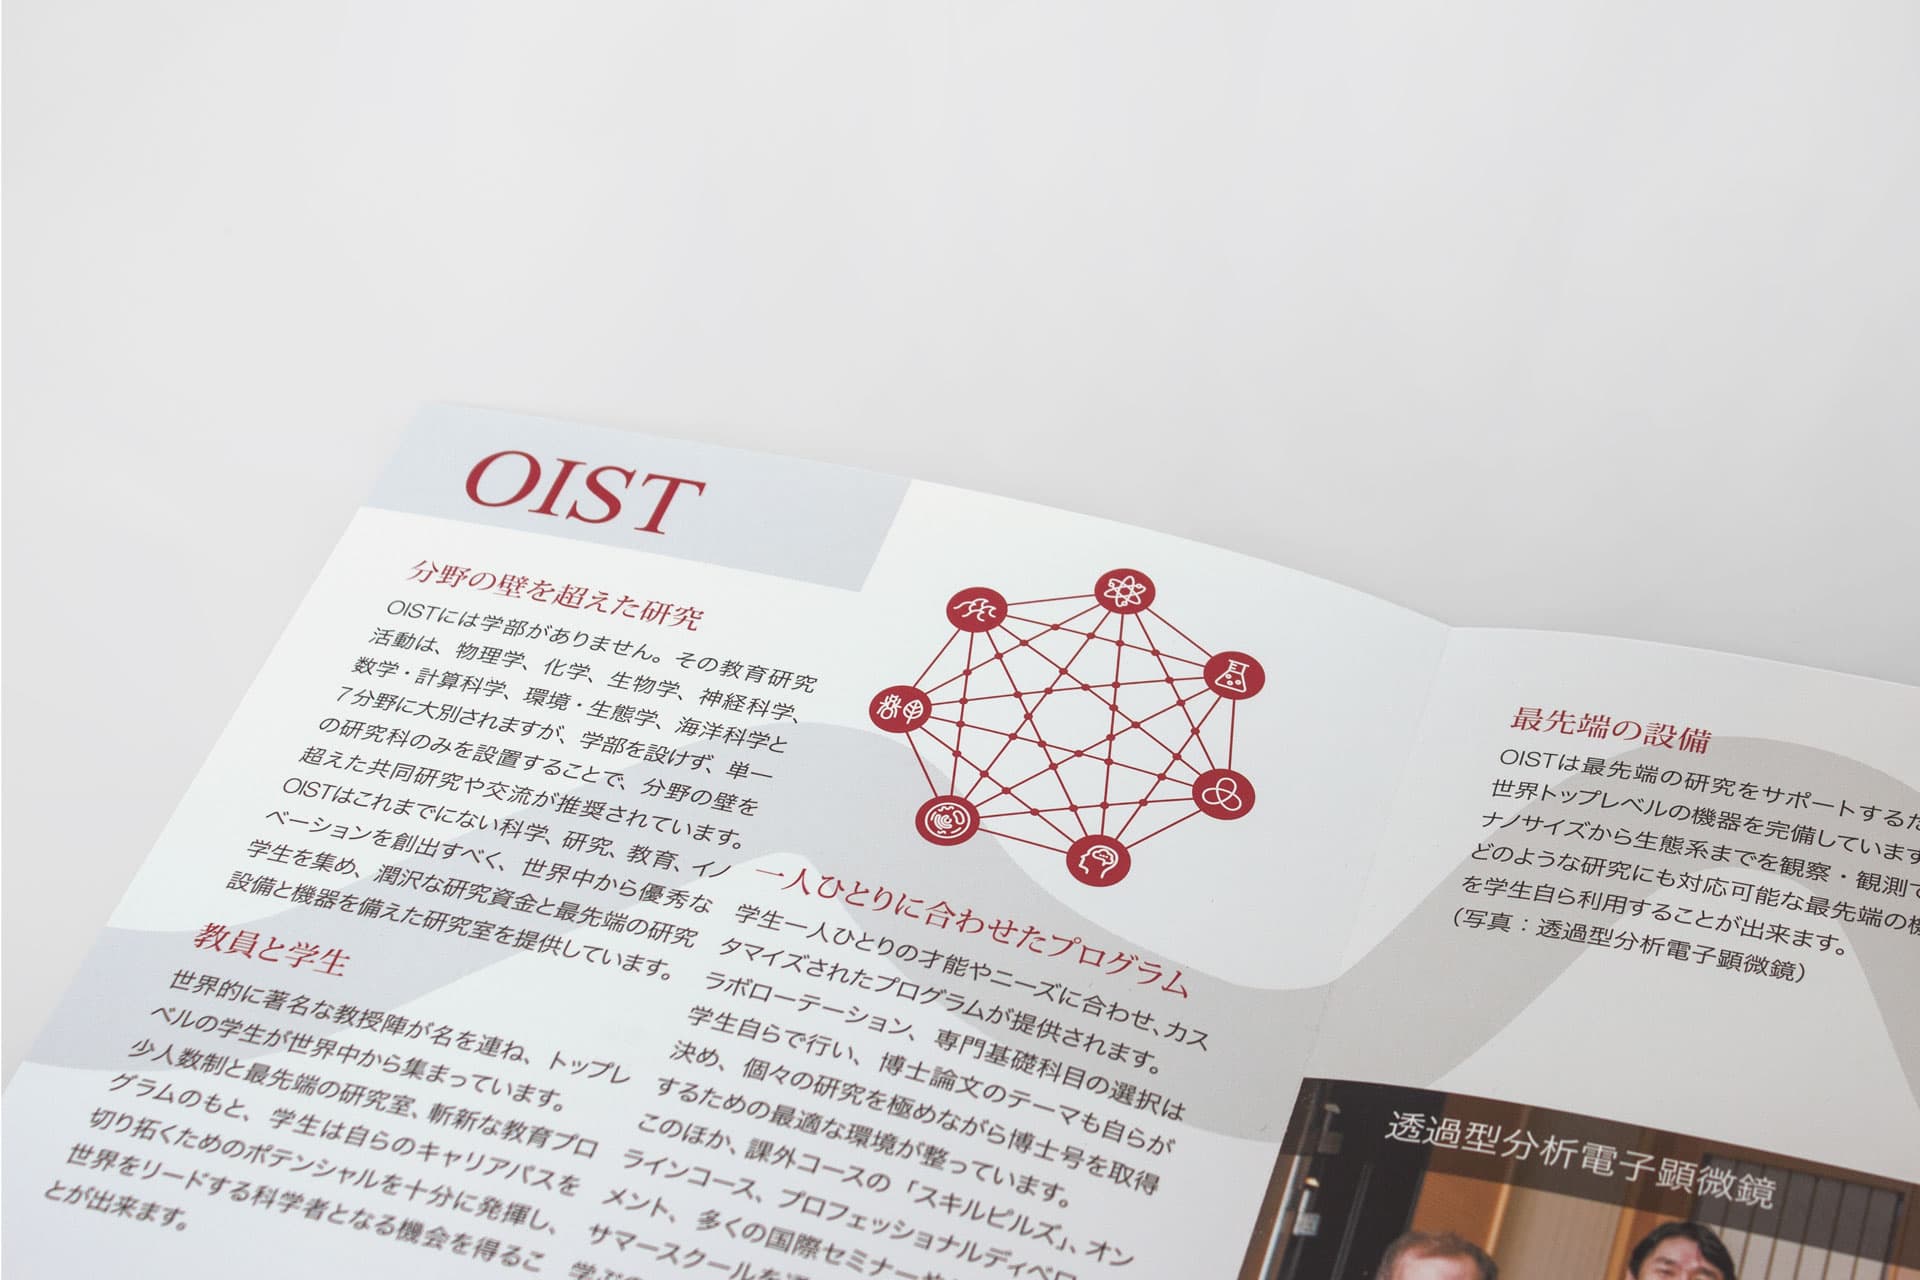 Leporello pamphlet for Okinawa Institute of Science and Technology (OIST) - PhD and Research Internships